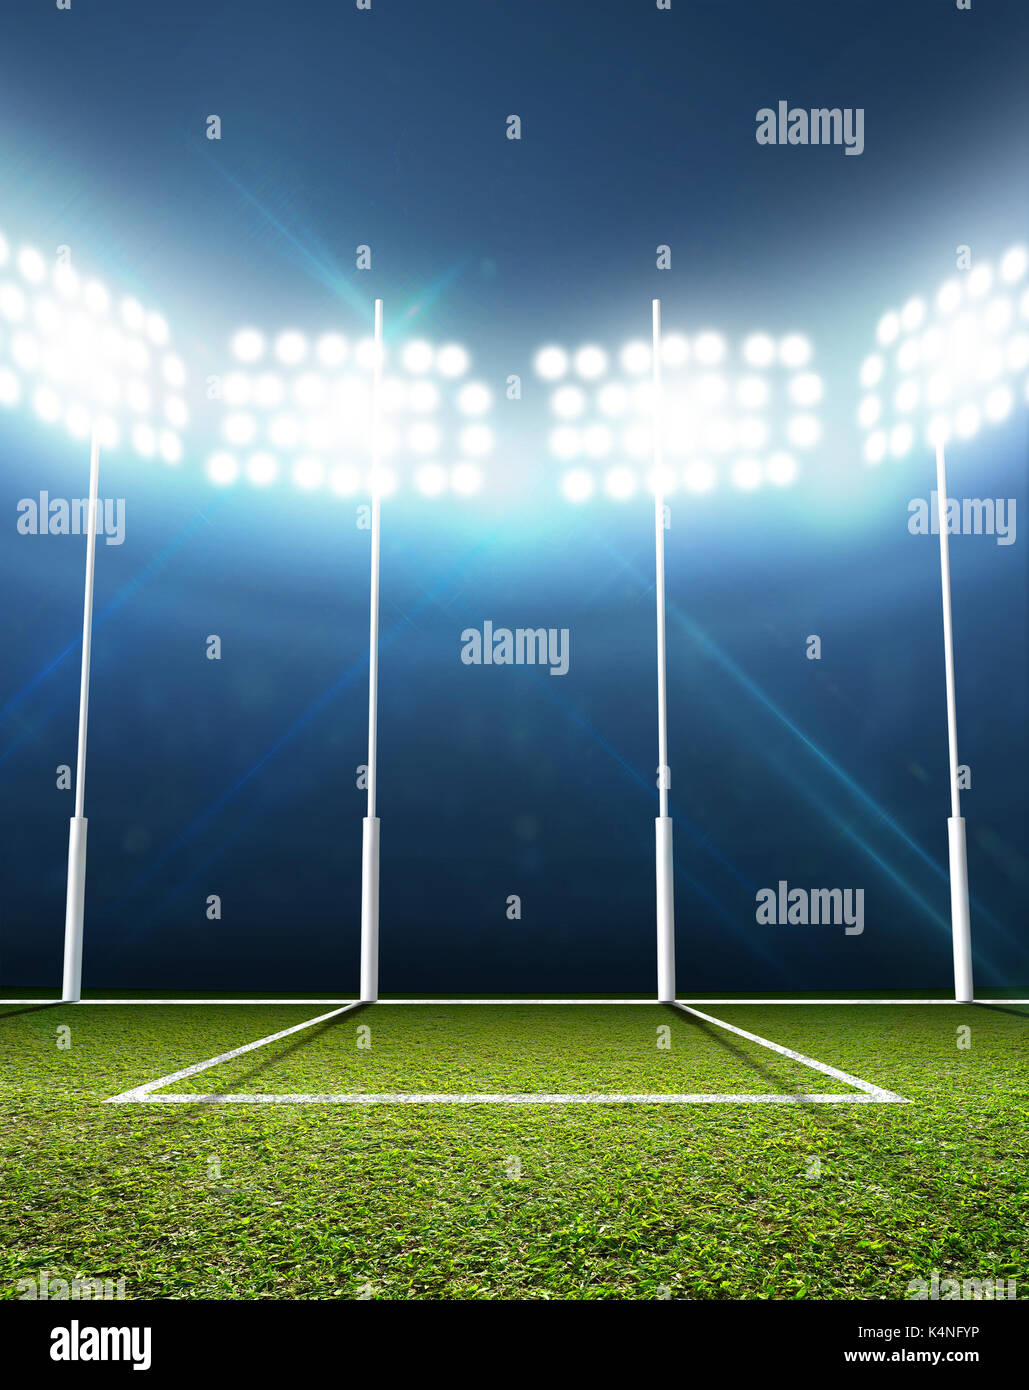 An aussie rules football stadium with a marked green grass pitch and goal posts in the nighttime under illuminated floodlights - 3D render Stock Photo